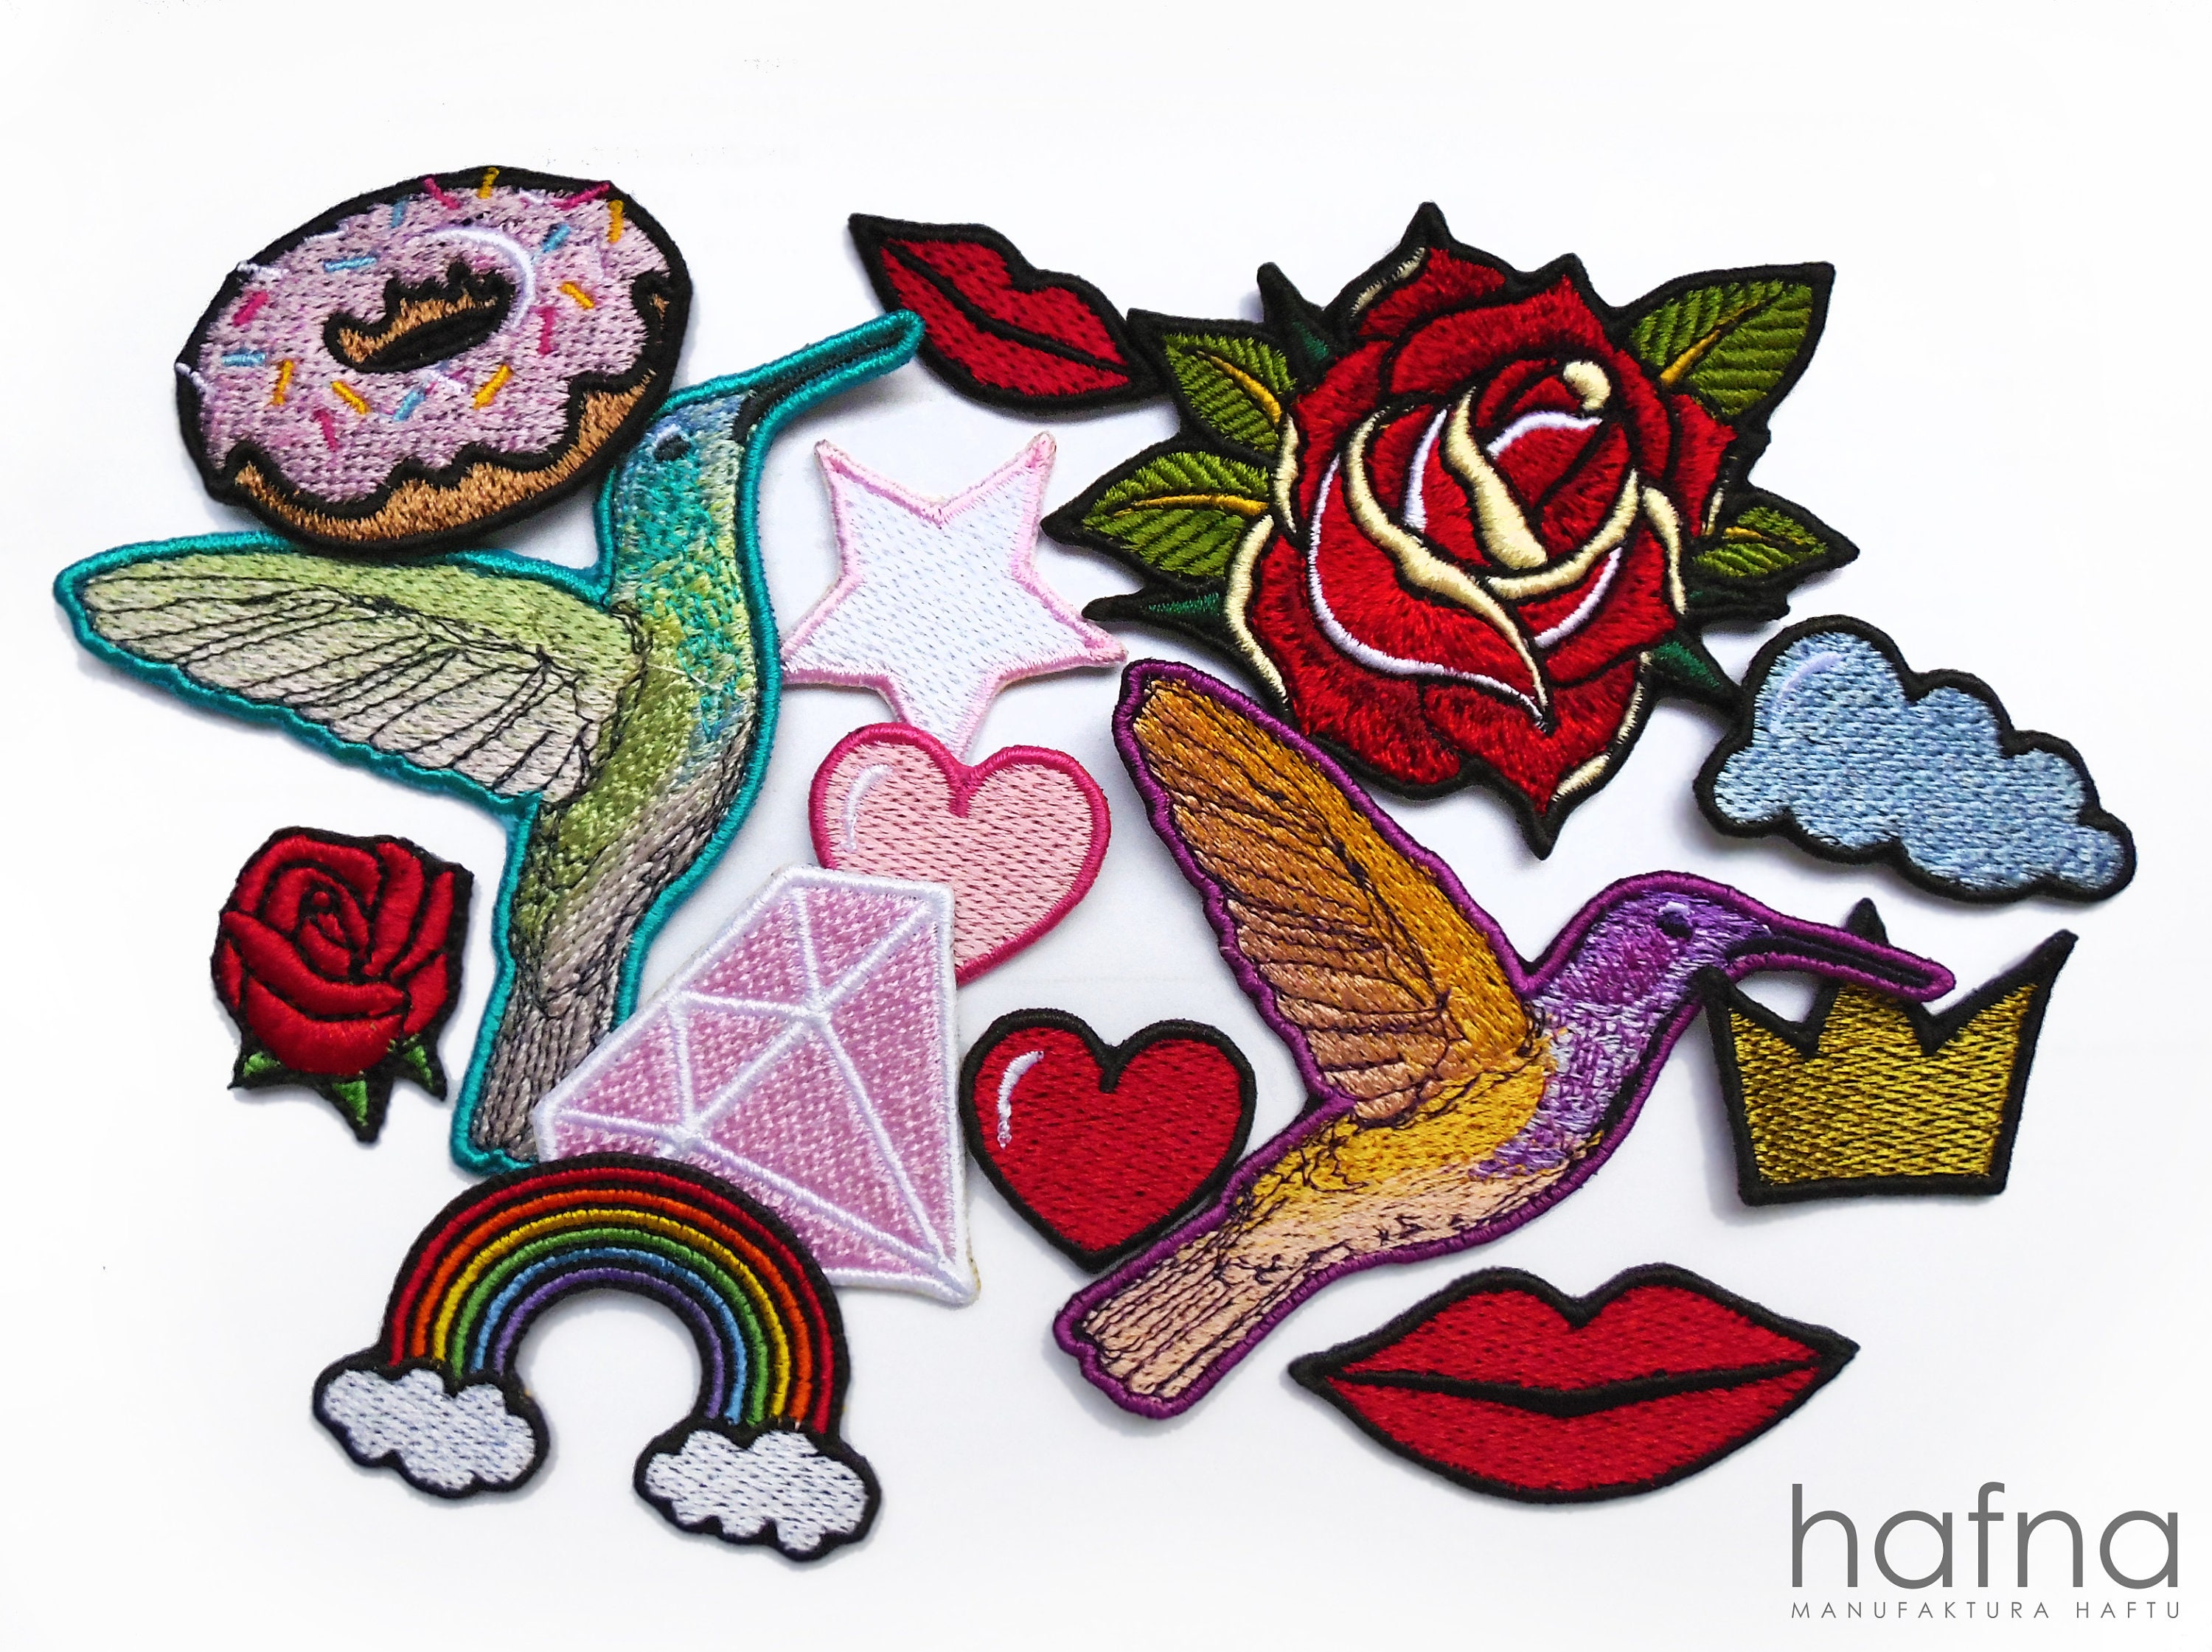 HHO Solid Pink Heart Patch Embroidered DIY Patches, Cute Applique Sew Iron on Kids Craft Patch for Bags Jackets Jeans Clothes